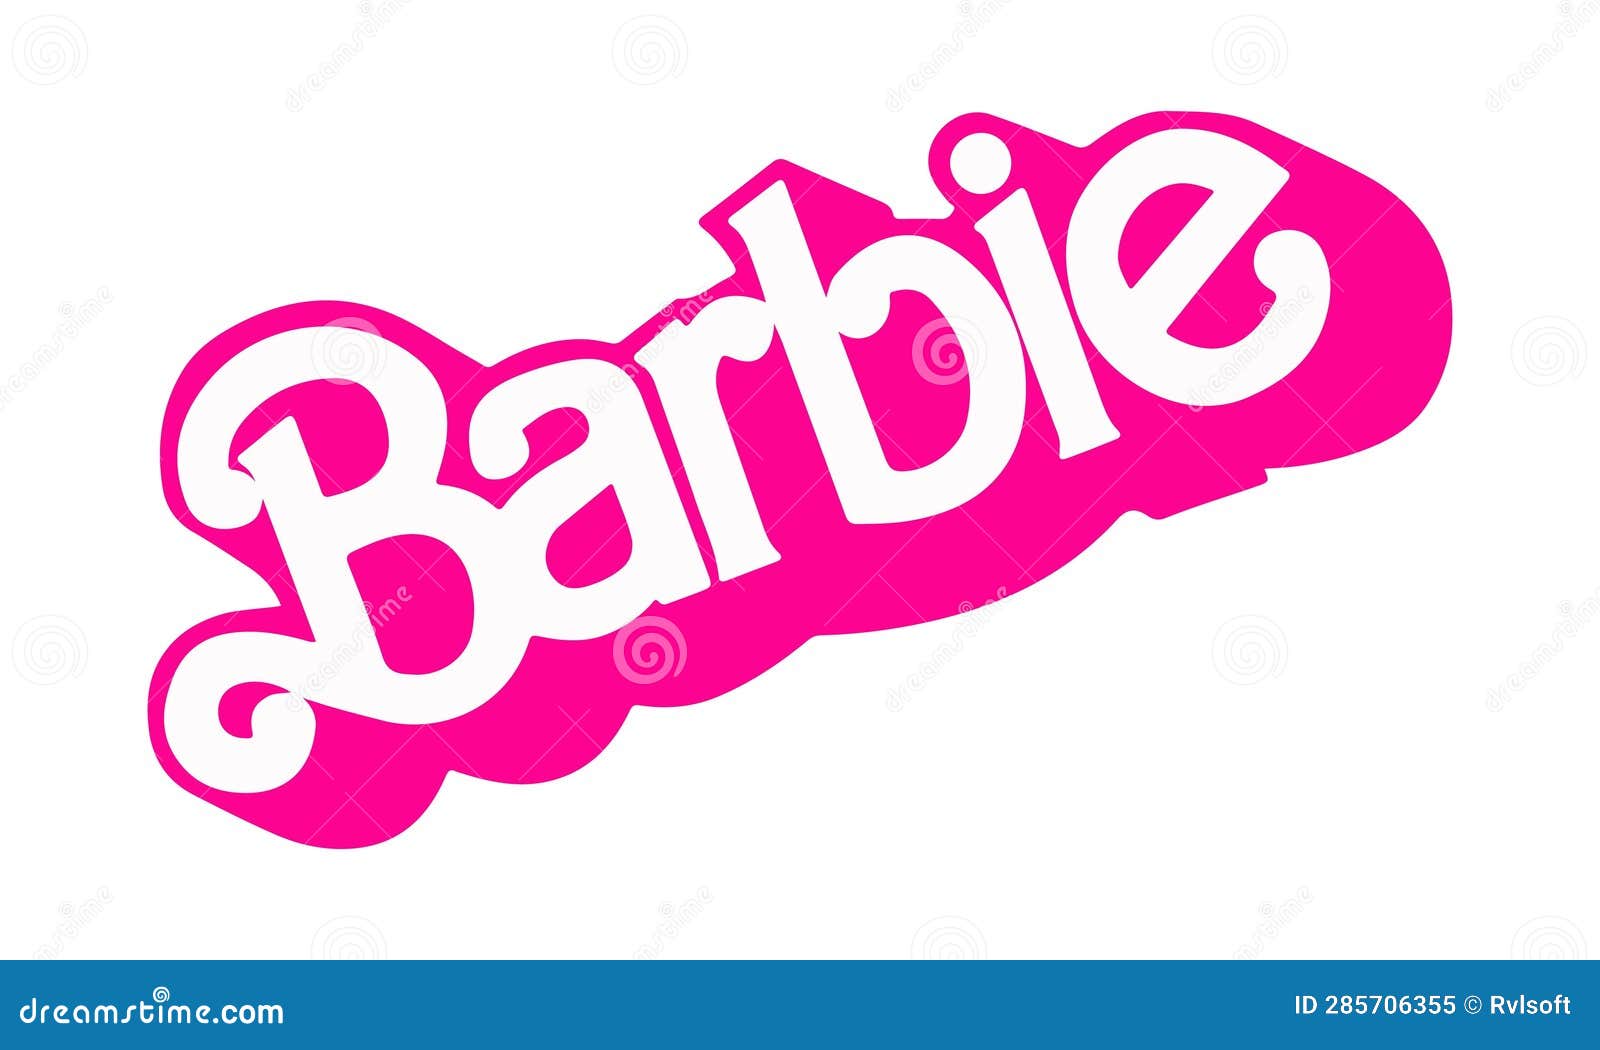 Barbie Movie Logo on White Background, Vector Illustration. Barbie is a ...